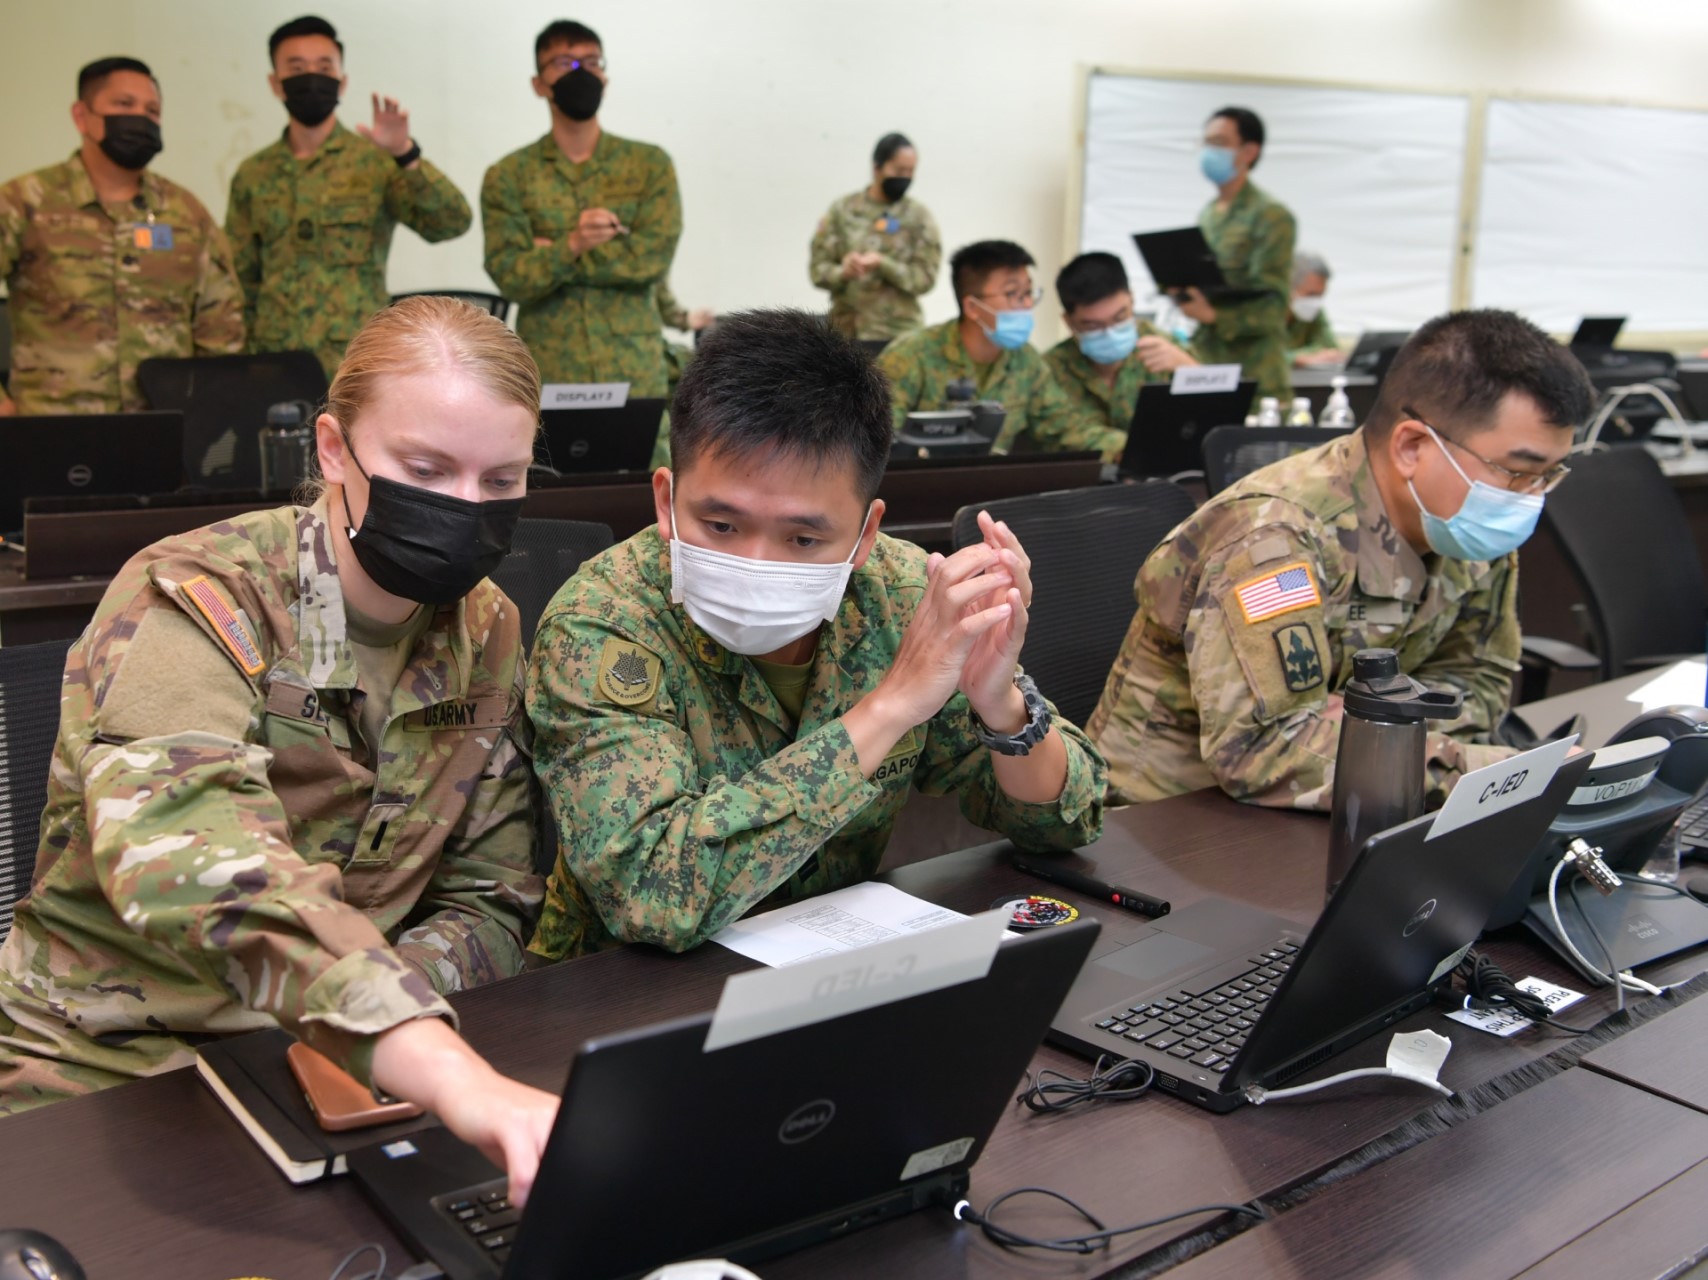 SAF and US Army personnel in discussion during the Command Post Exercise as part of XTiB 22.